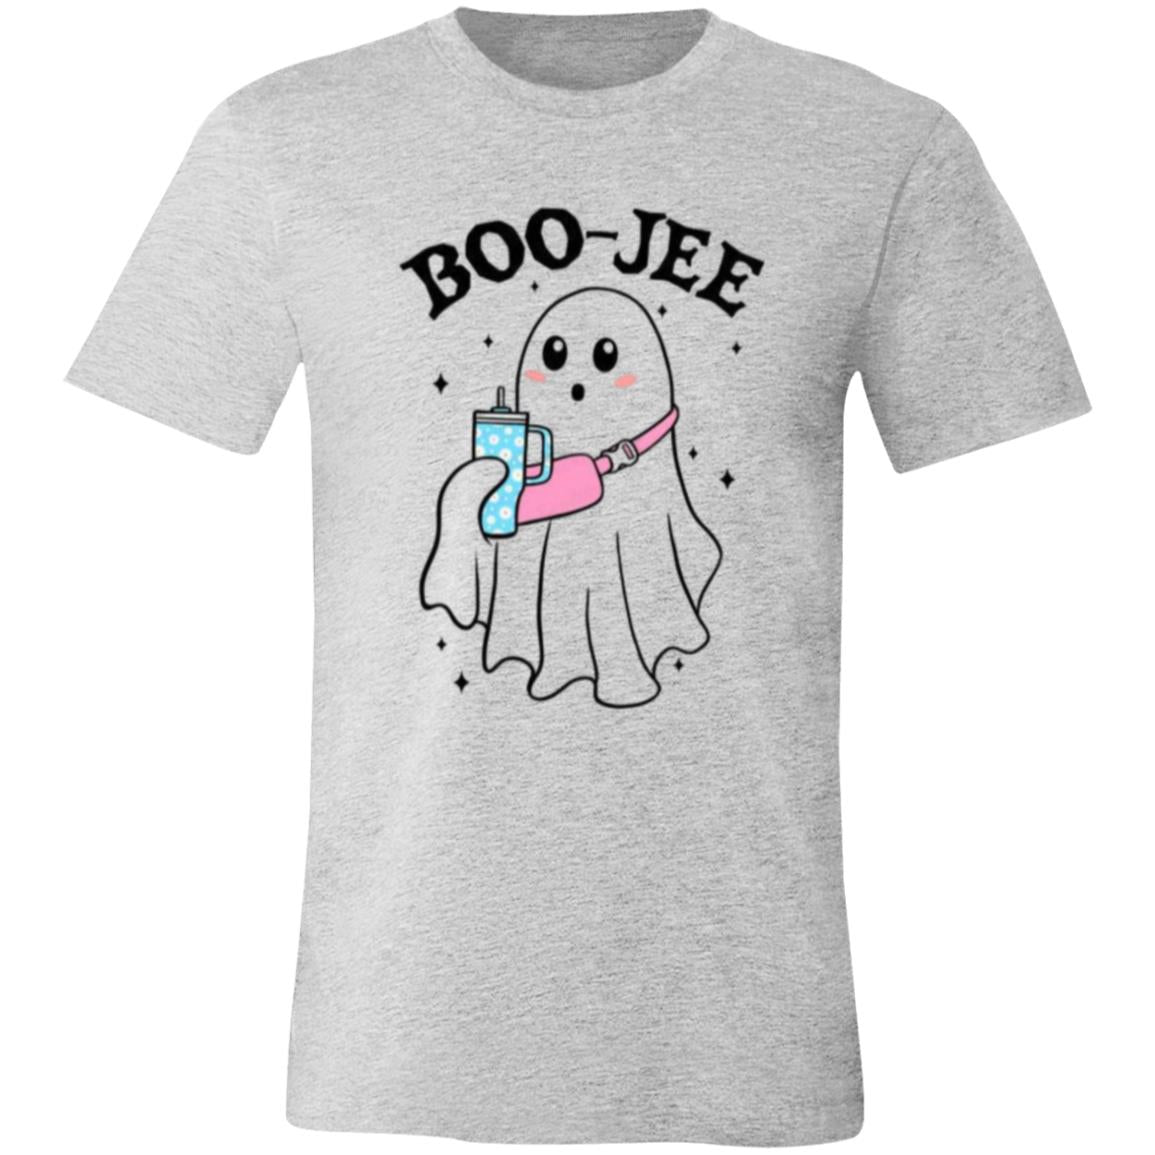 BOO-JEE Halloween T-Shirt| For Him| For Her| For the Spooky Occasion.